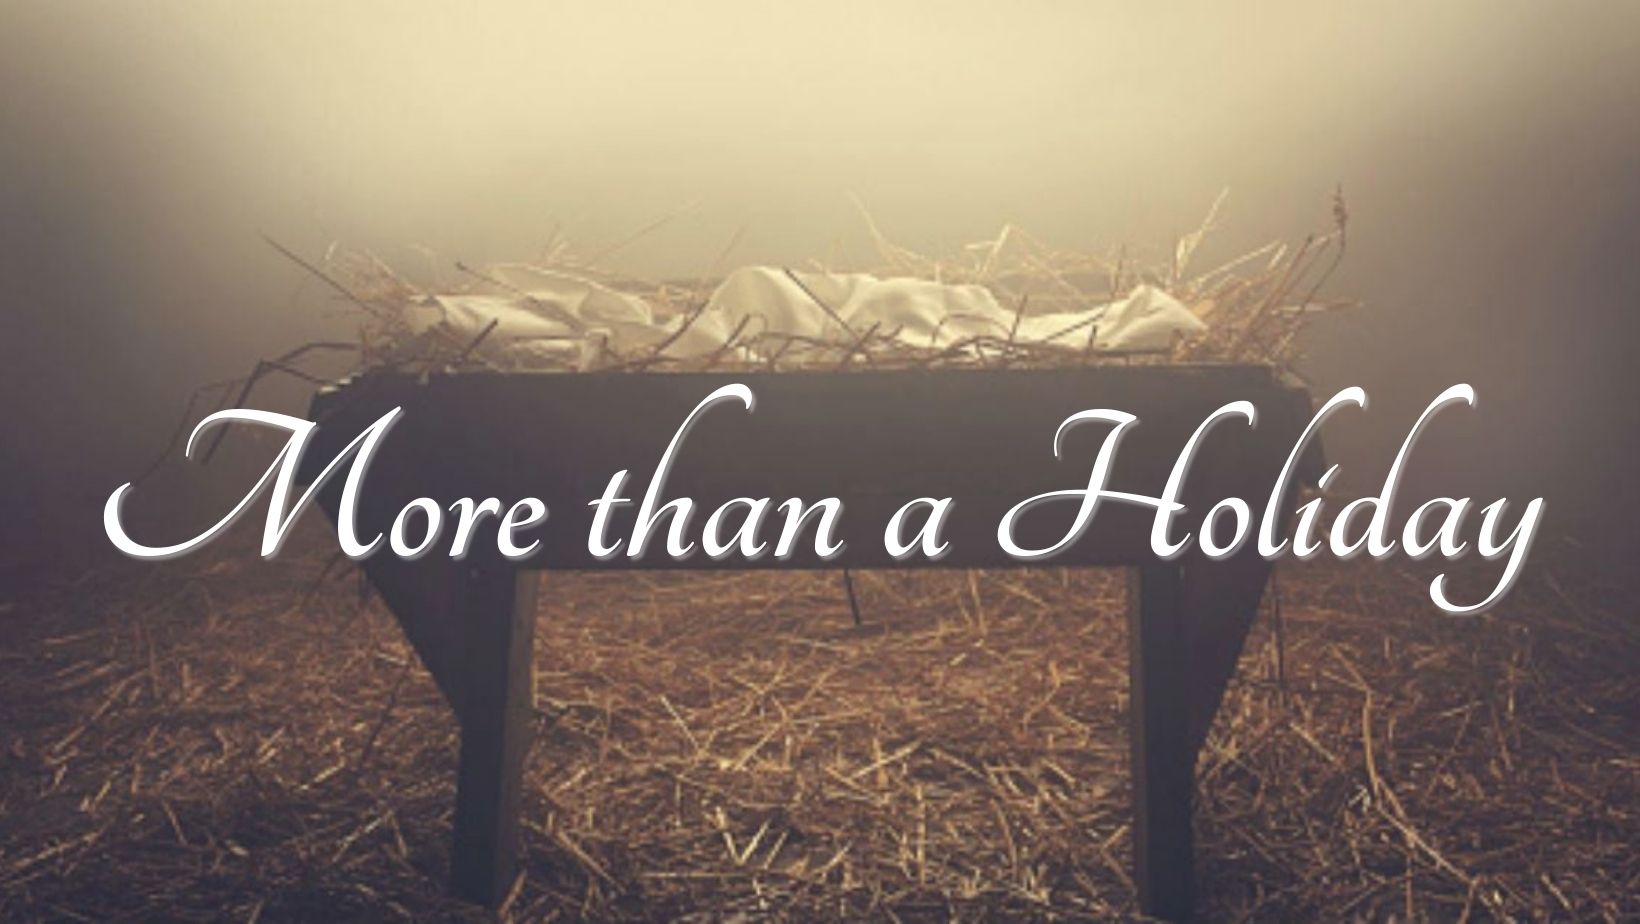 MORE THAN A HOLIDAY - LESSONS FROM CHRISTMAS - OBEDIENCE